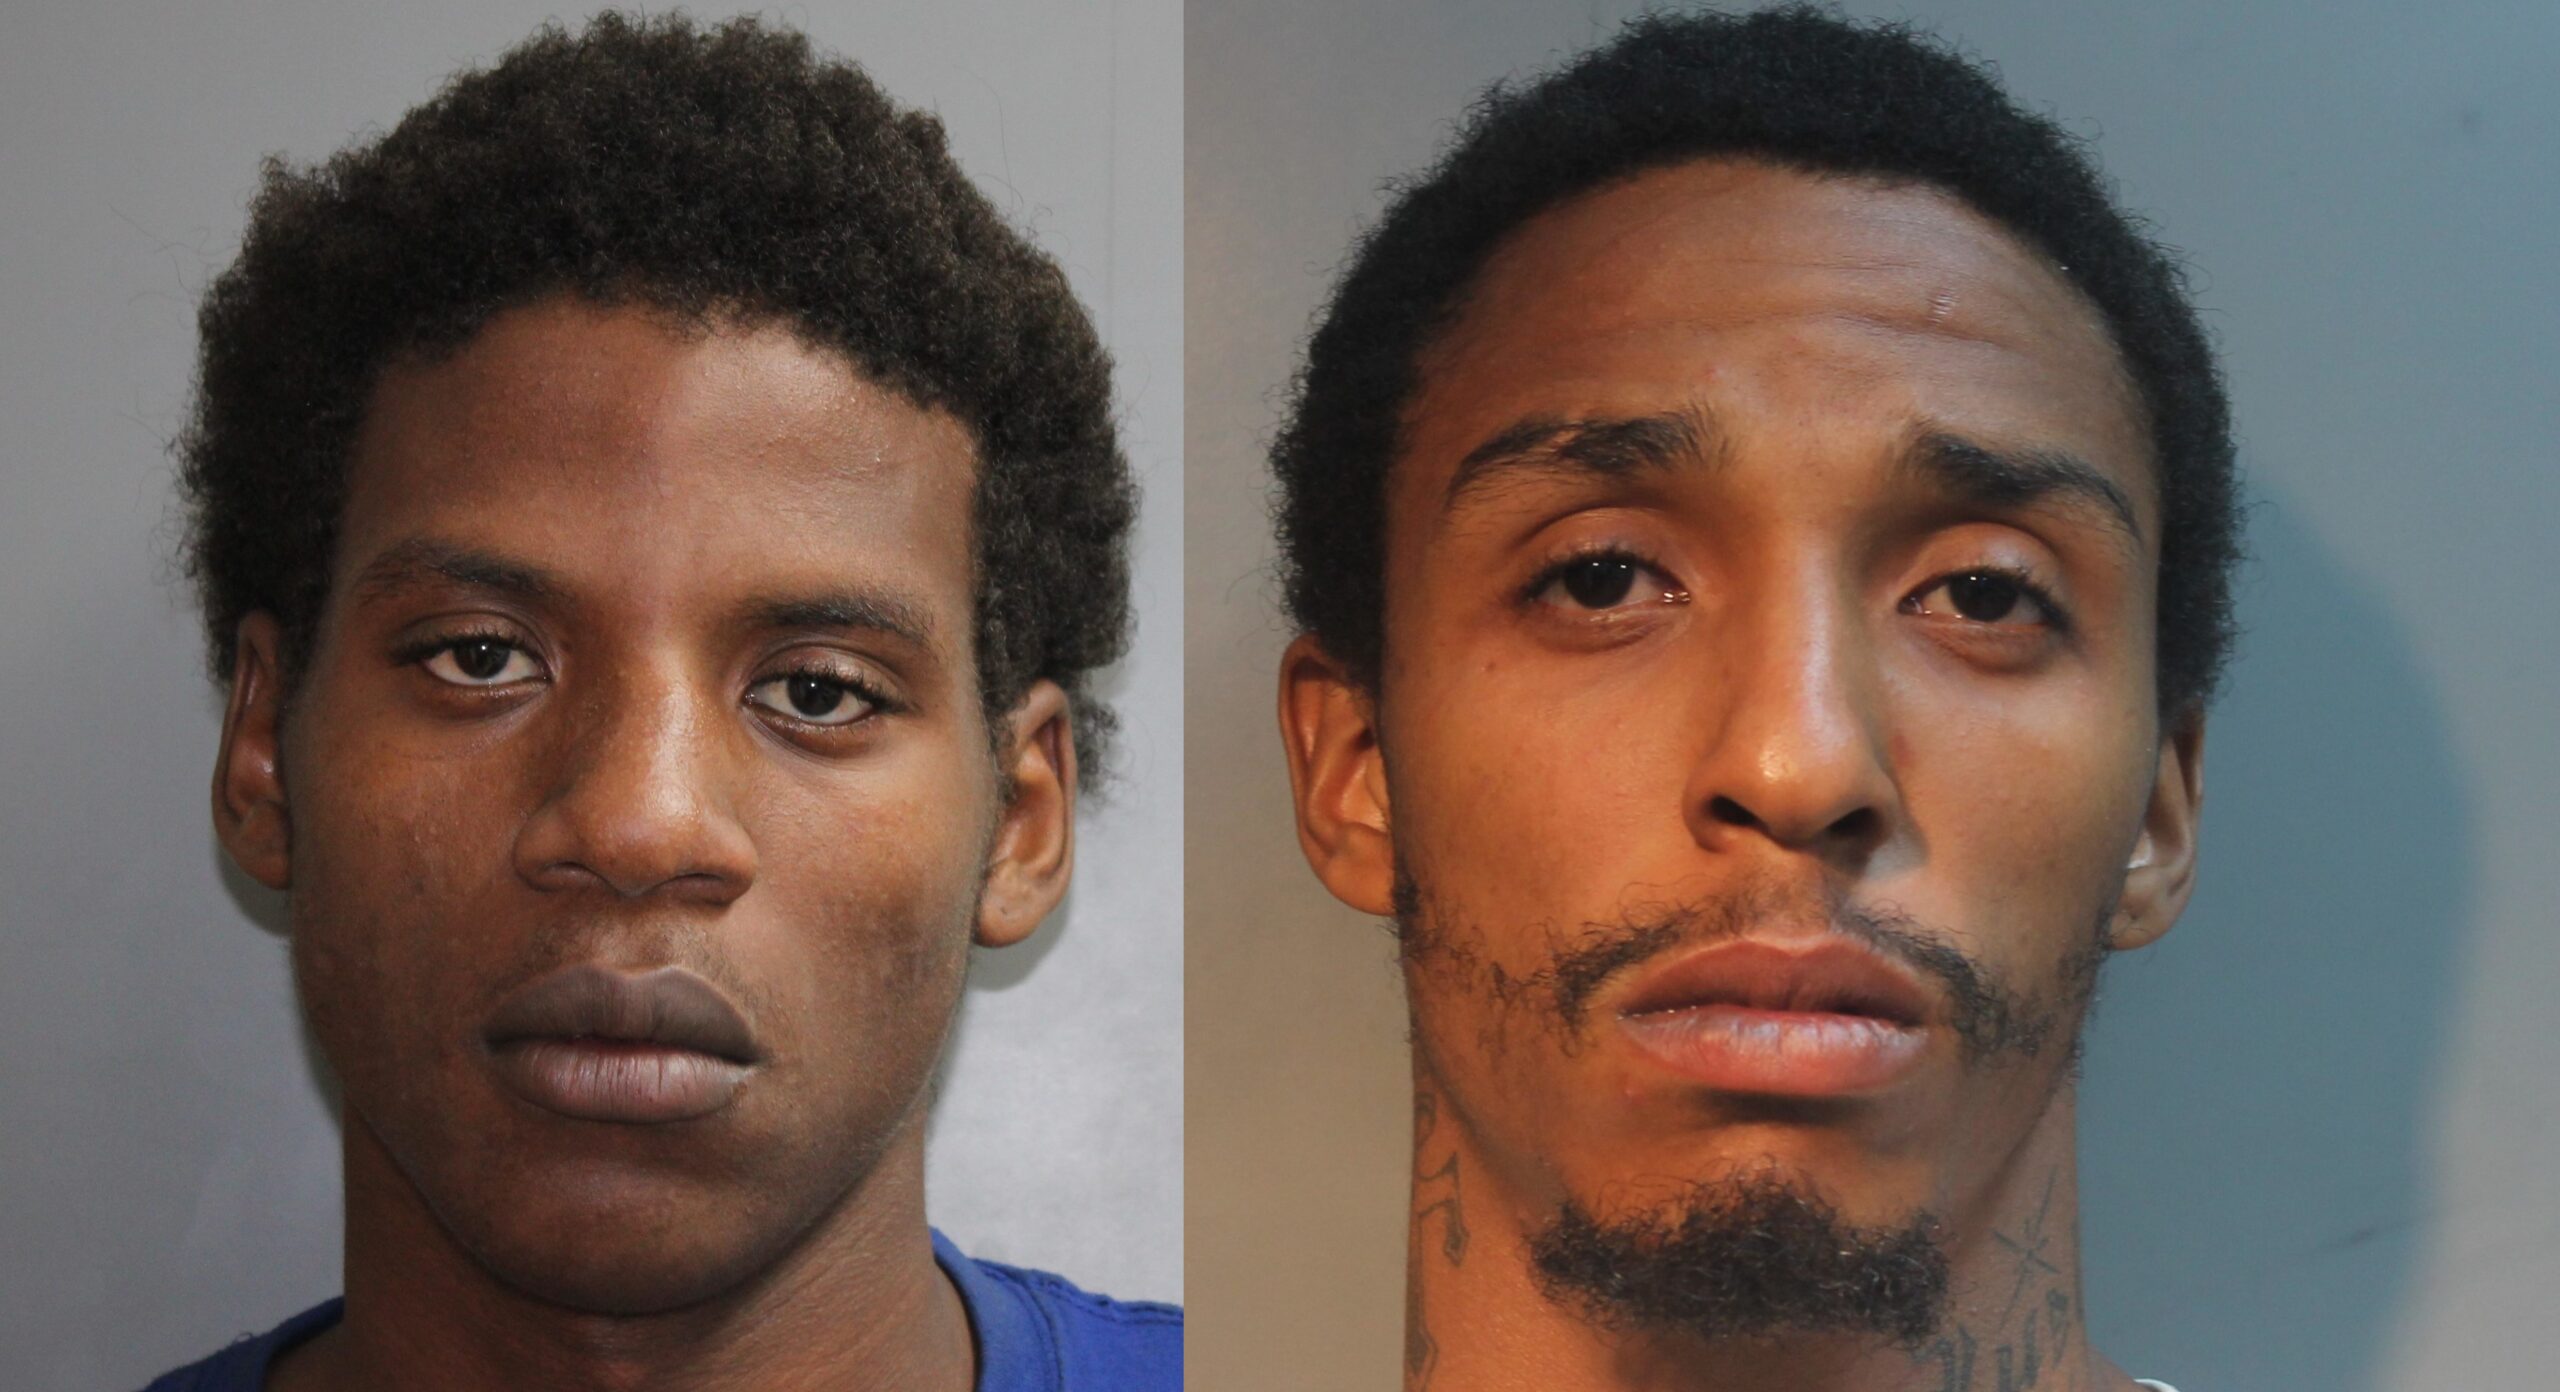 2 Men Arrested, 1 Male Minor Held In Shooting of 2 Women In Estate Paradise Friday